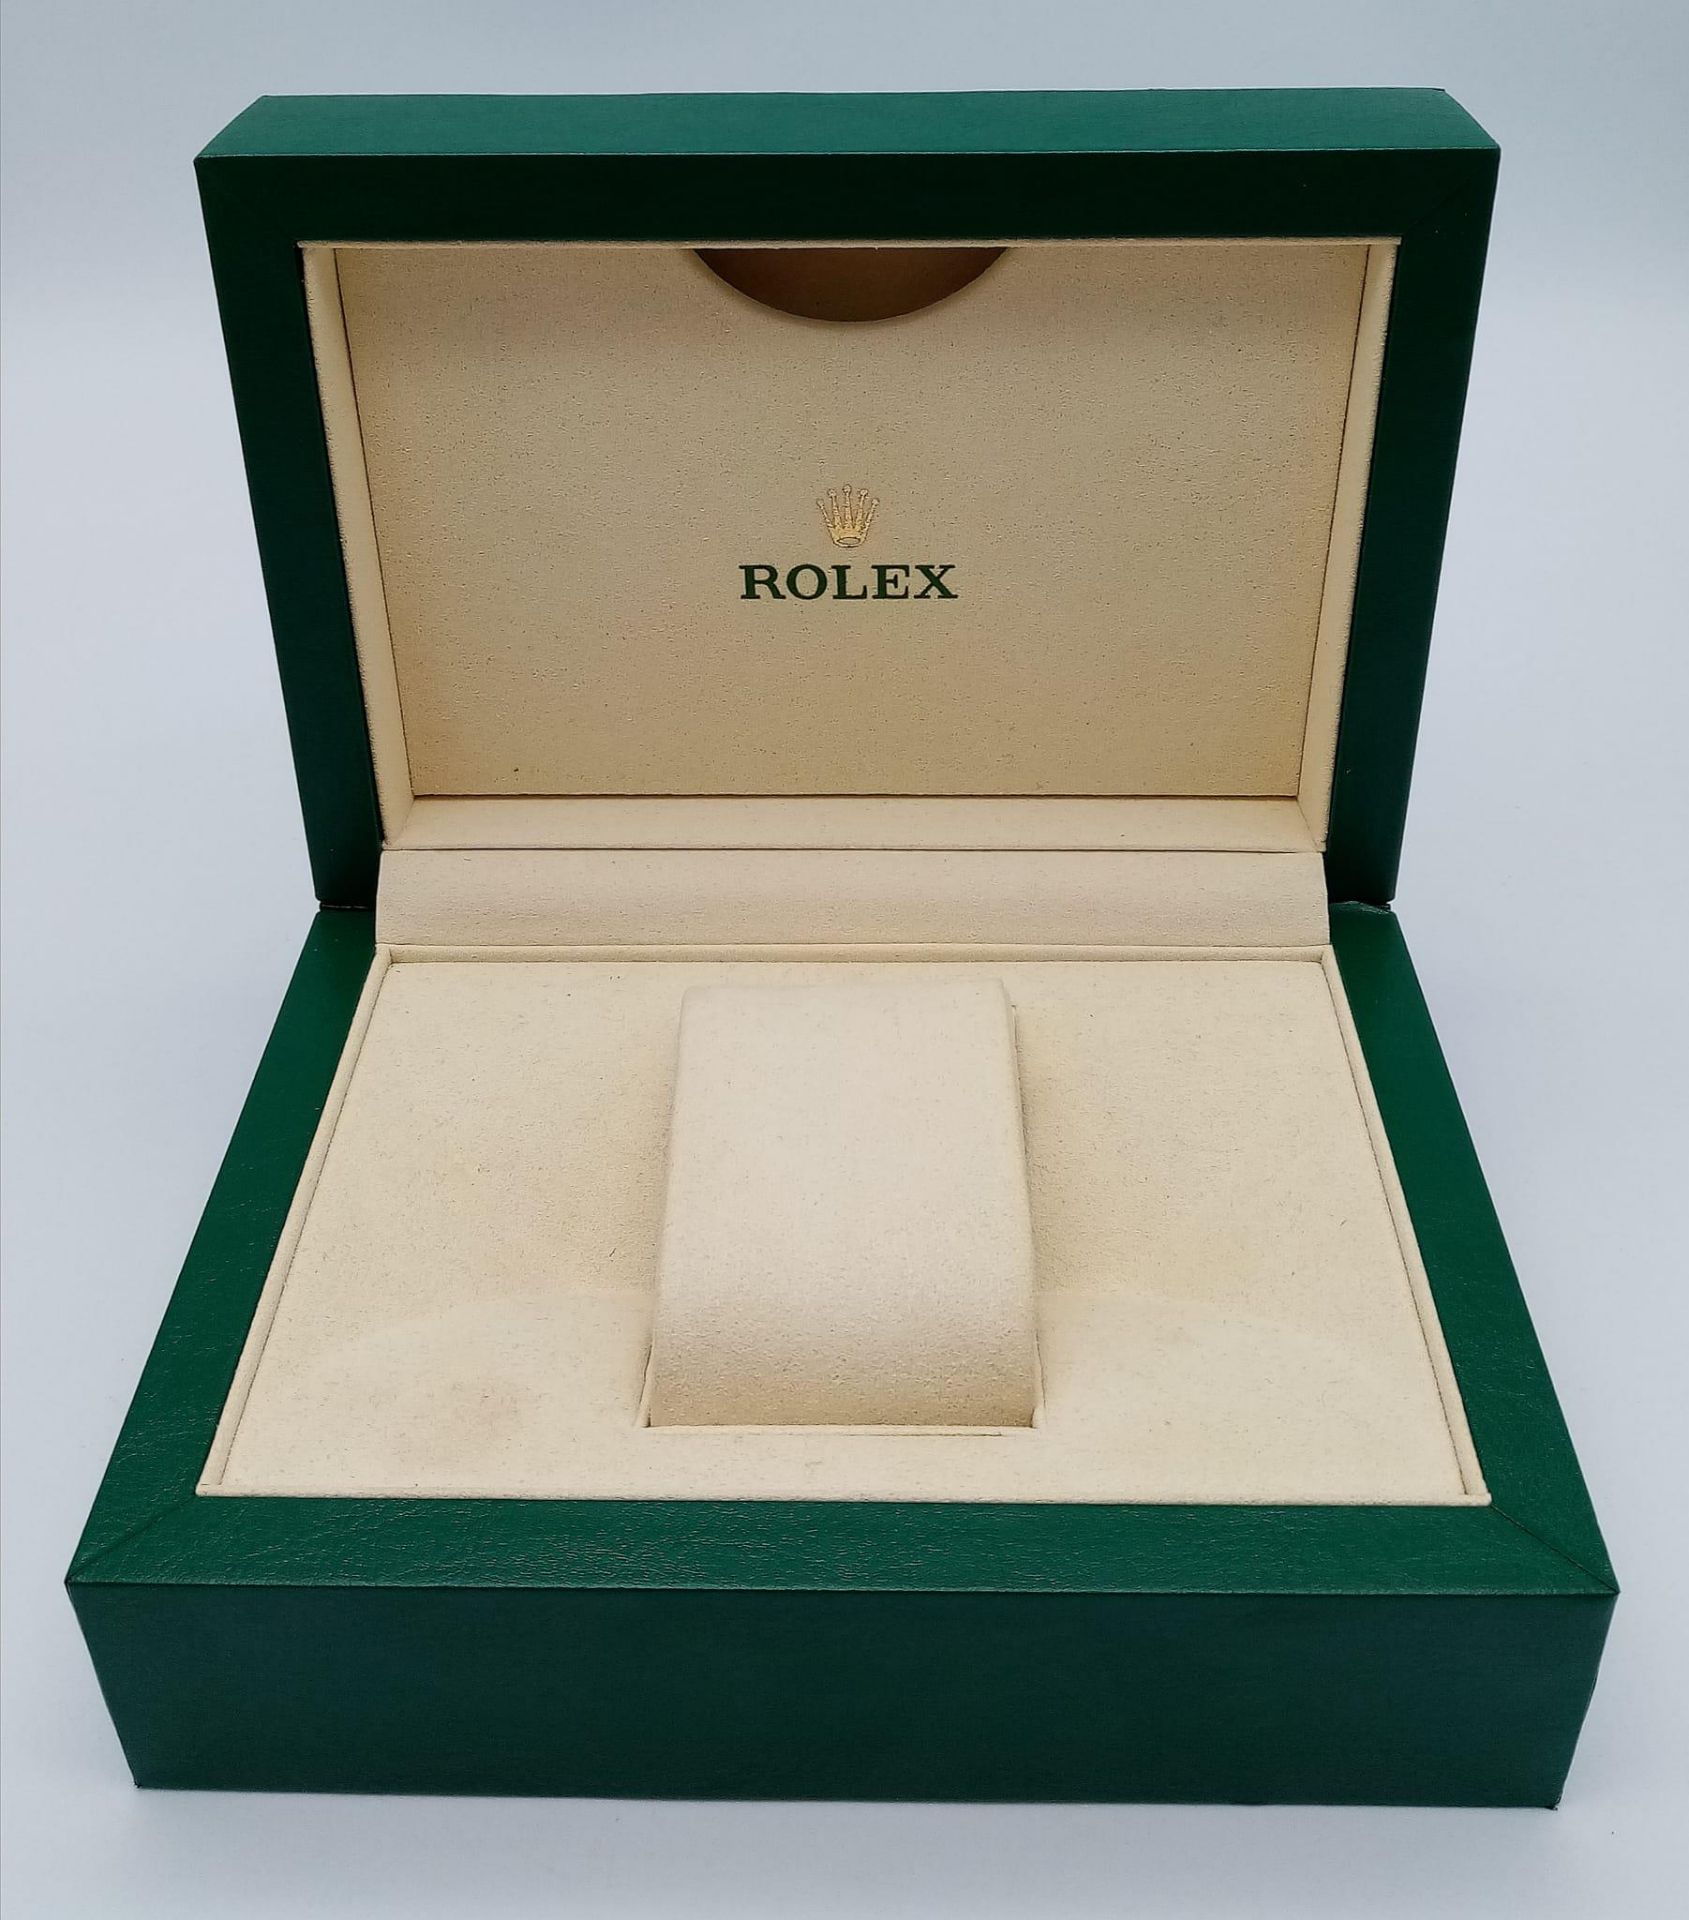 A Rolex Watch Case. Green ruffled exterior. Single watch space interior. 18cm x 13cm - Image 5 of 13